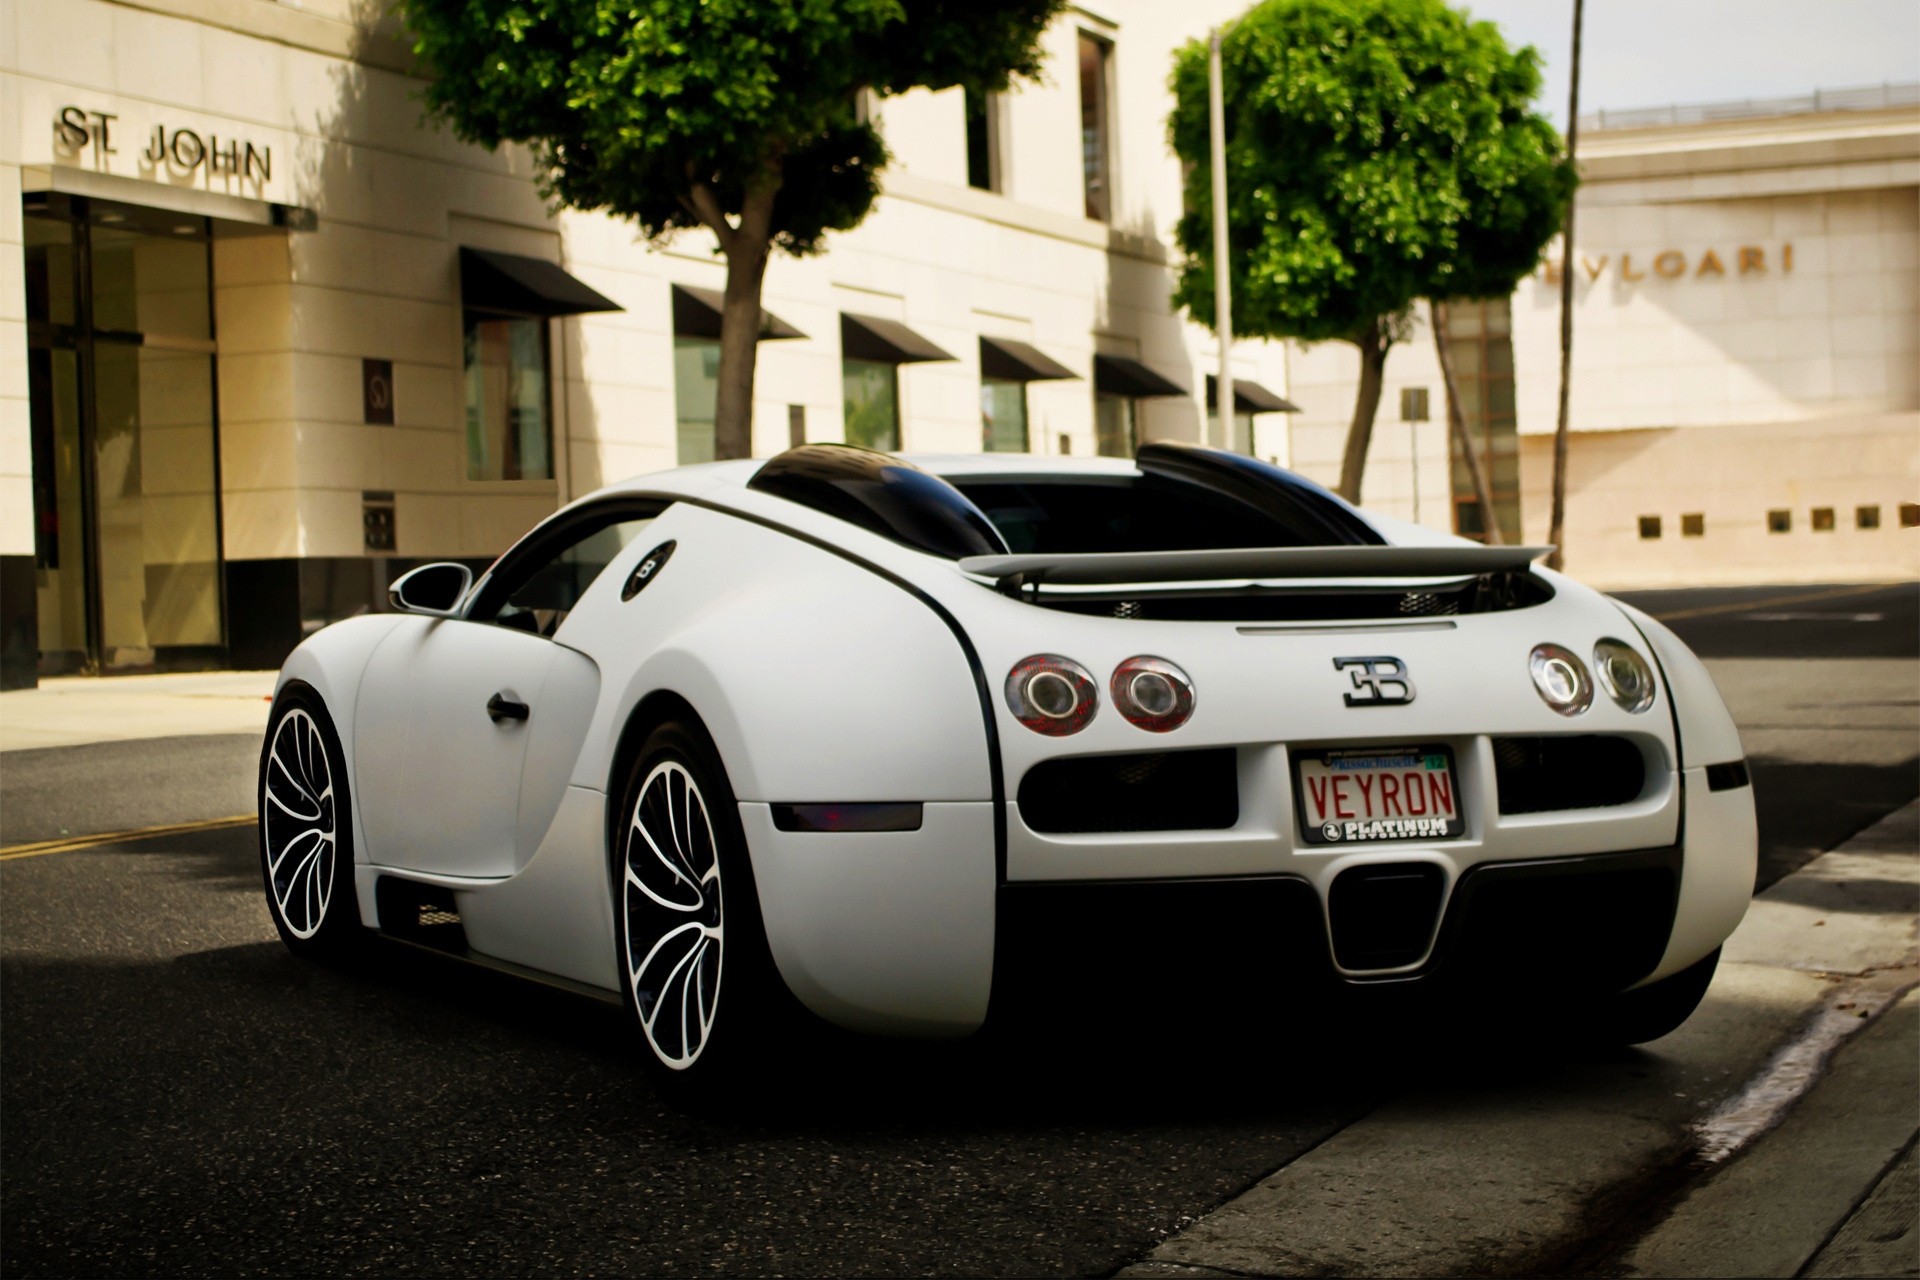 107845 download wallpaper bugatti, cars, white, back view, rear view, bumper screensavers and pictures for free